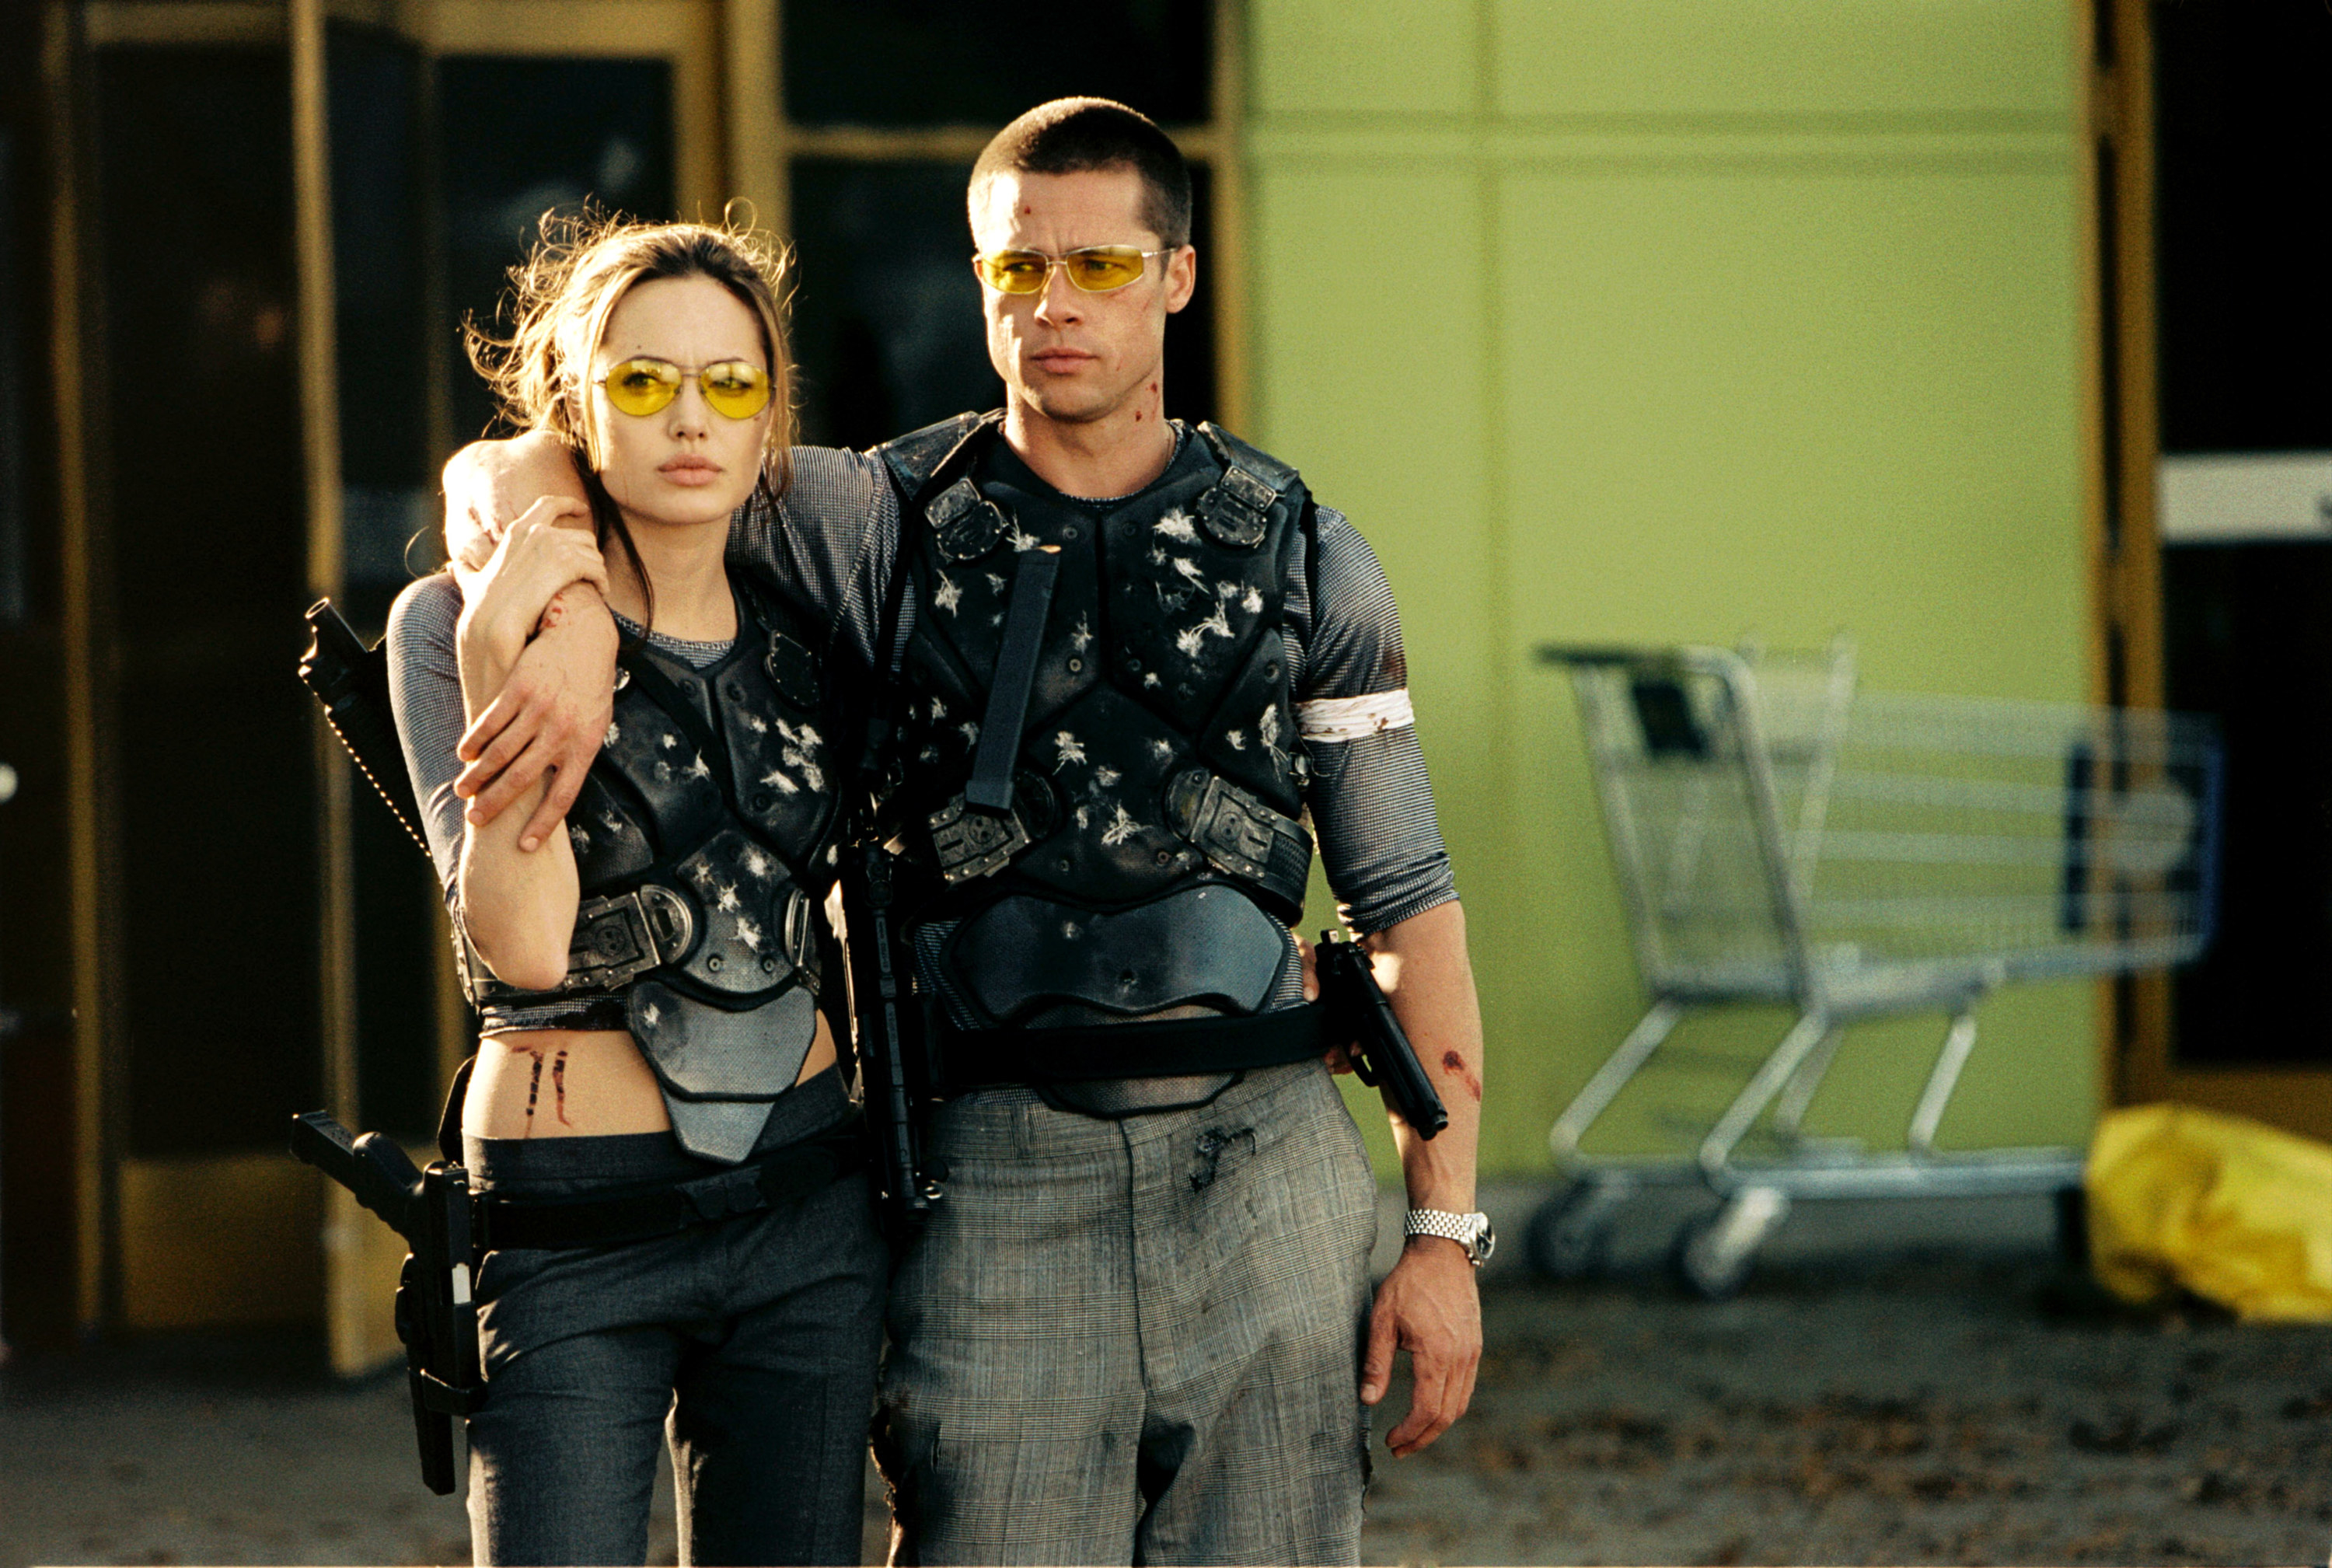 brad and angelina with scraps and weapons in the movie